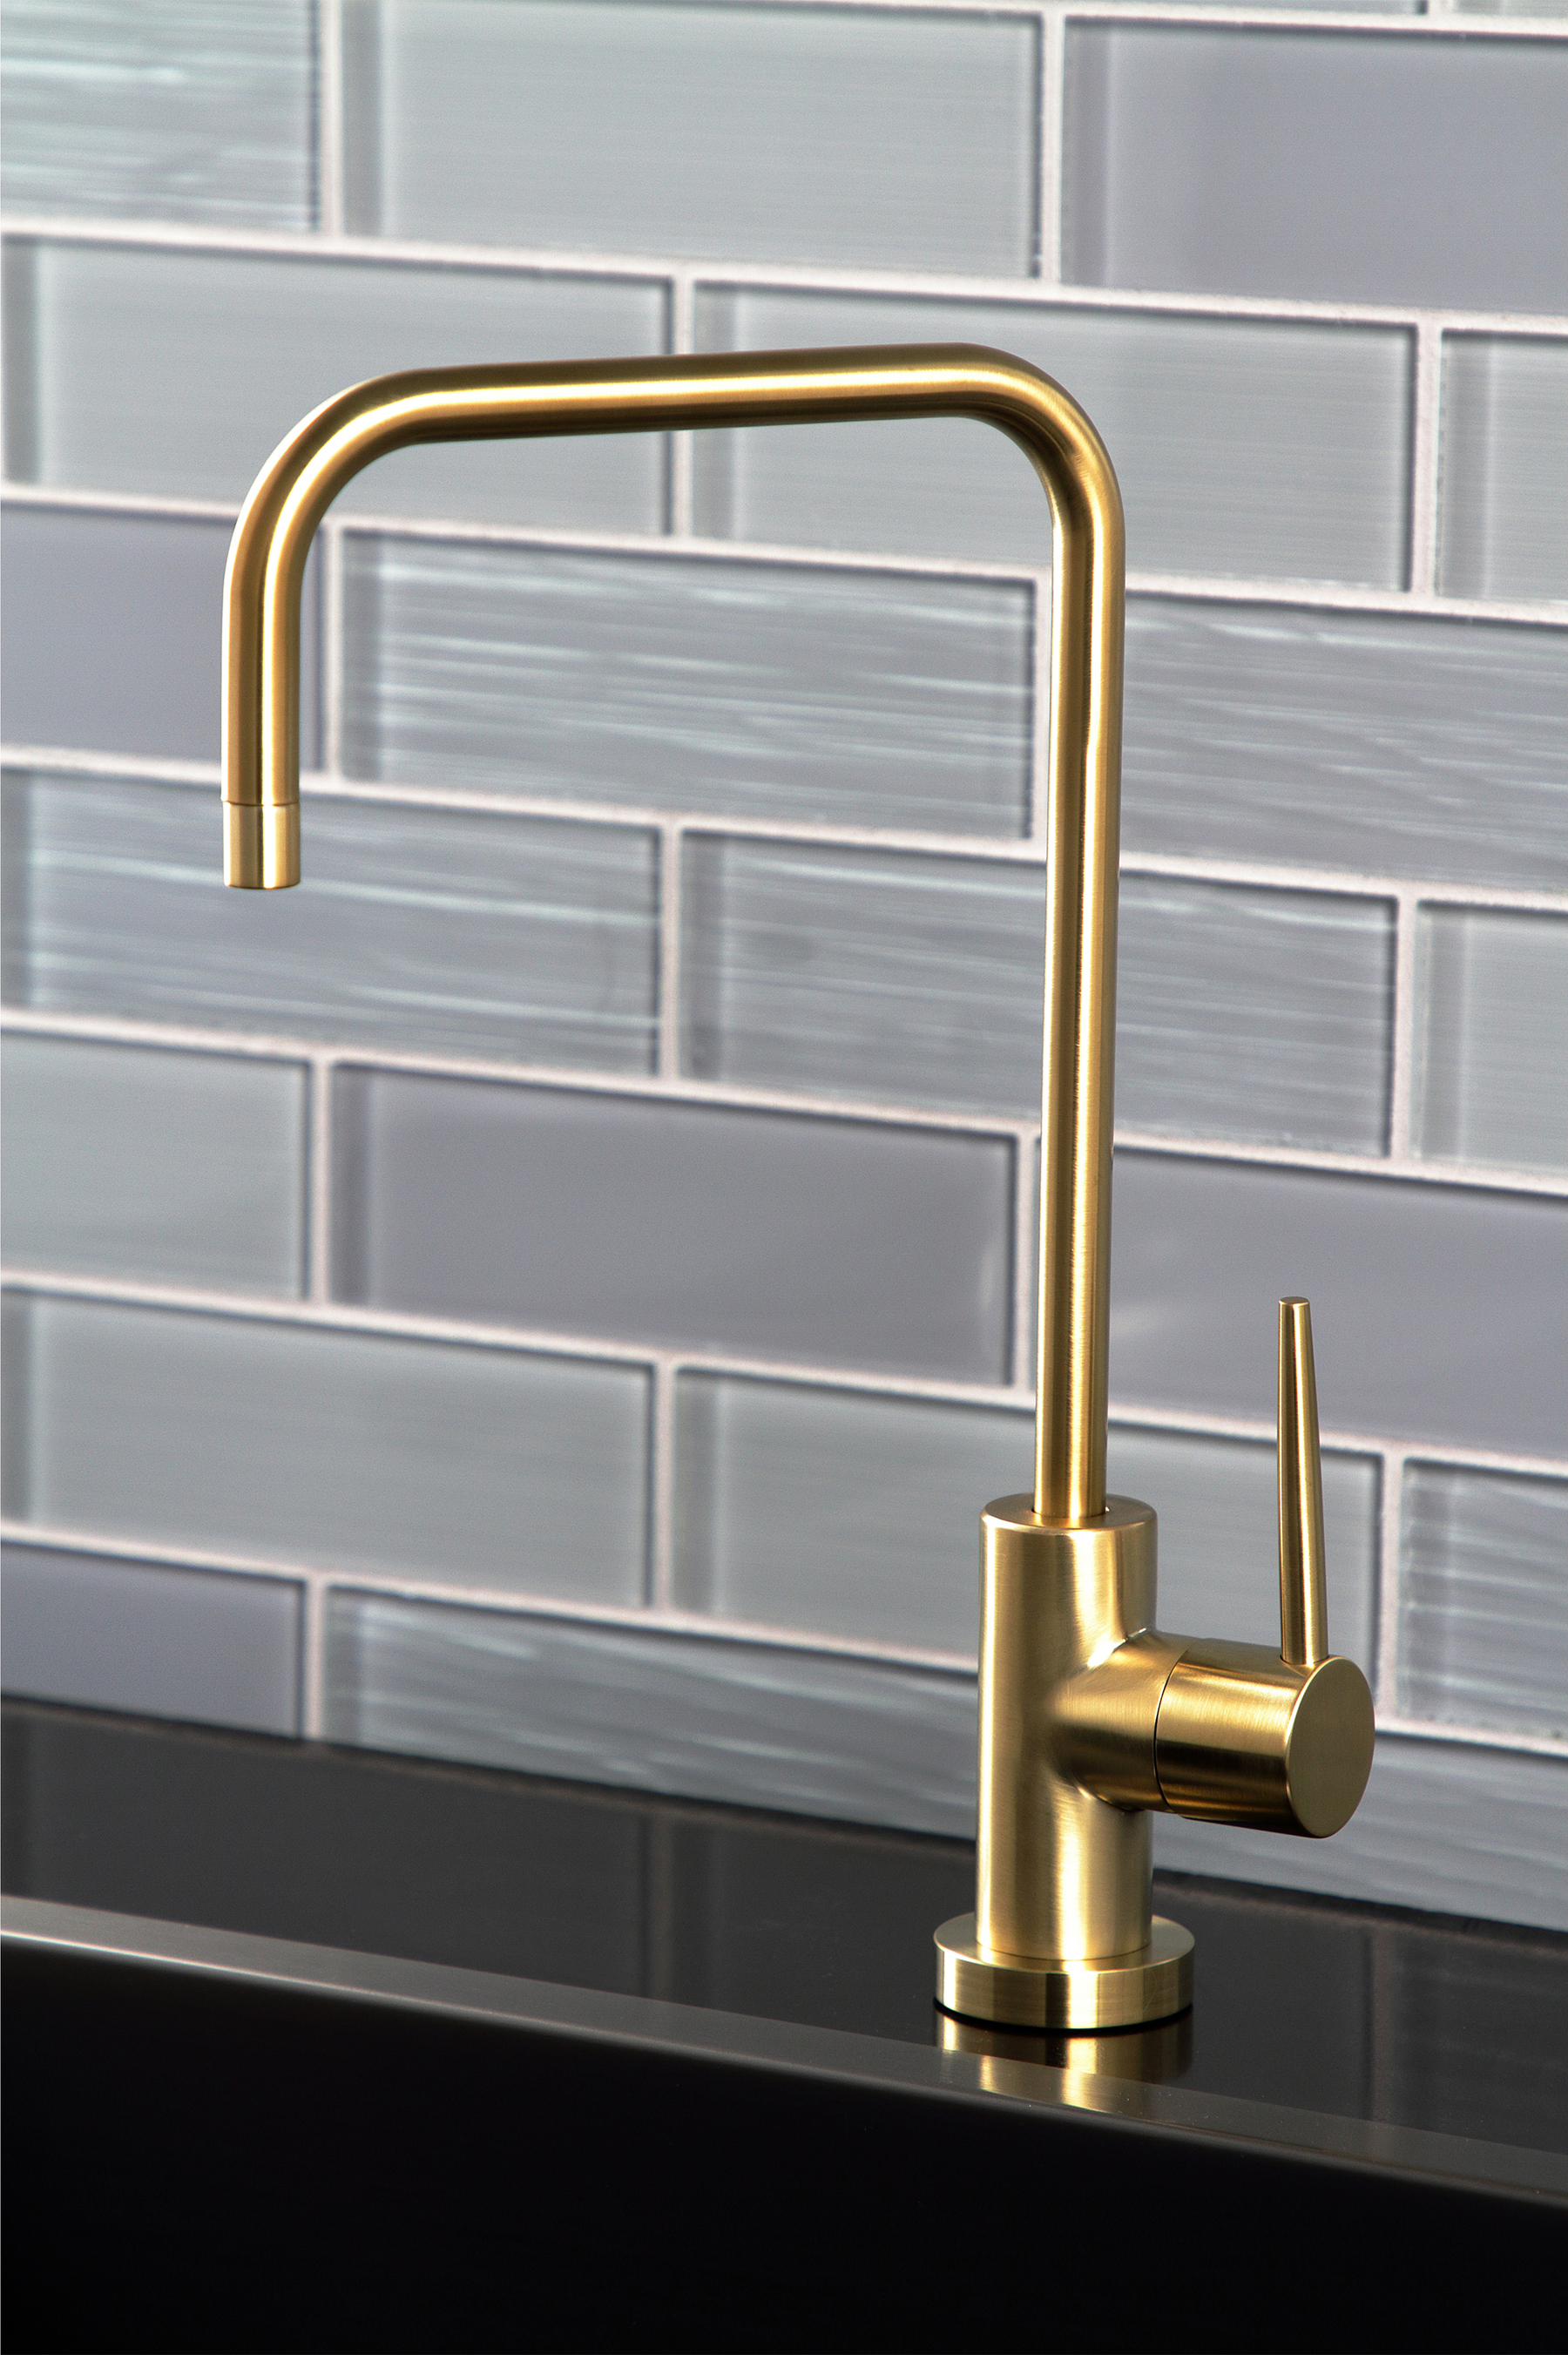 Water Filtration Faucet With a Heart of Gold, KS6197NYL